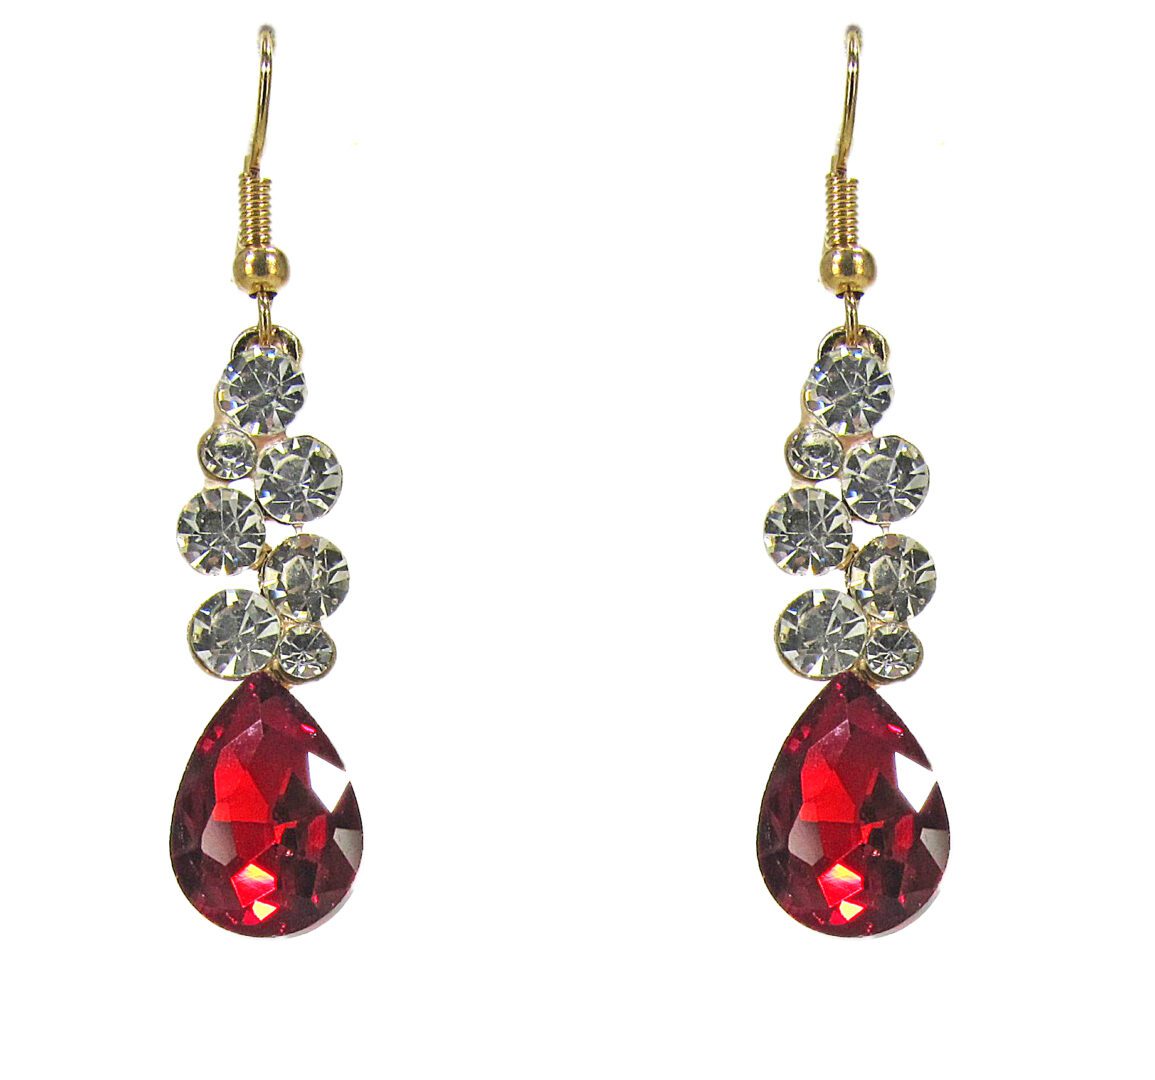 earrings with red teardrop crystal and some diamonds